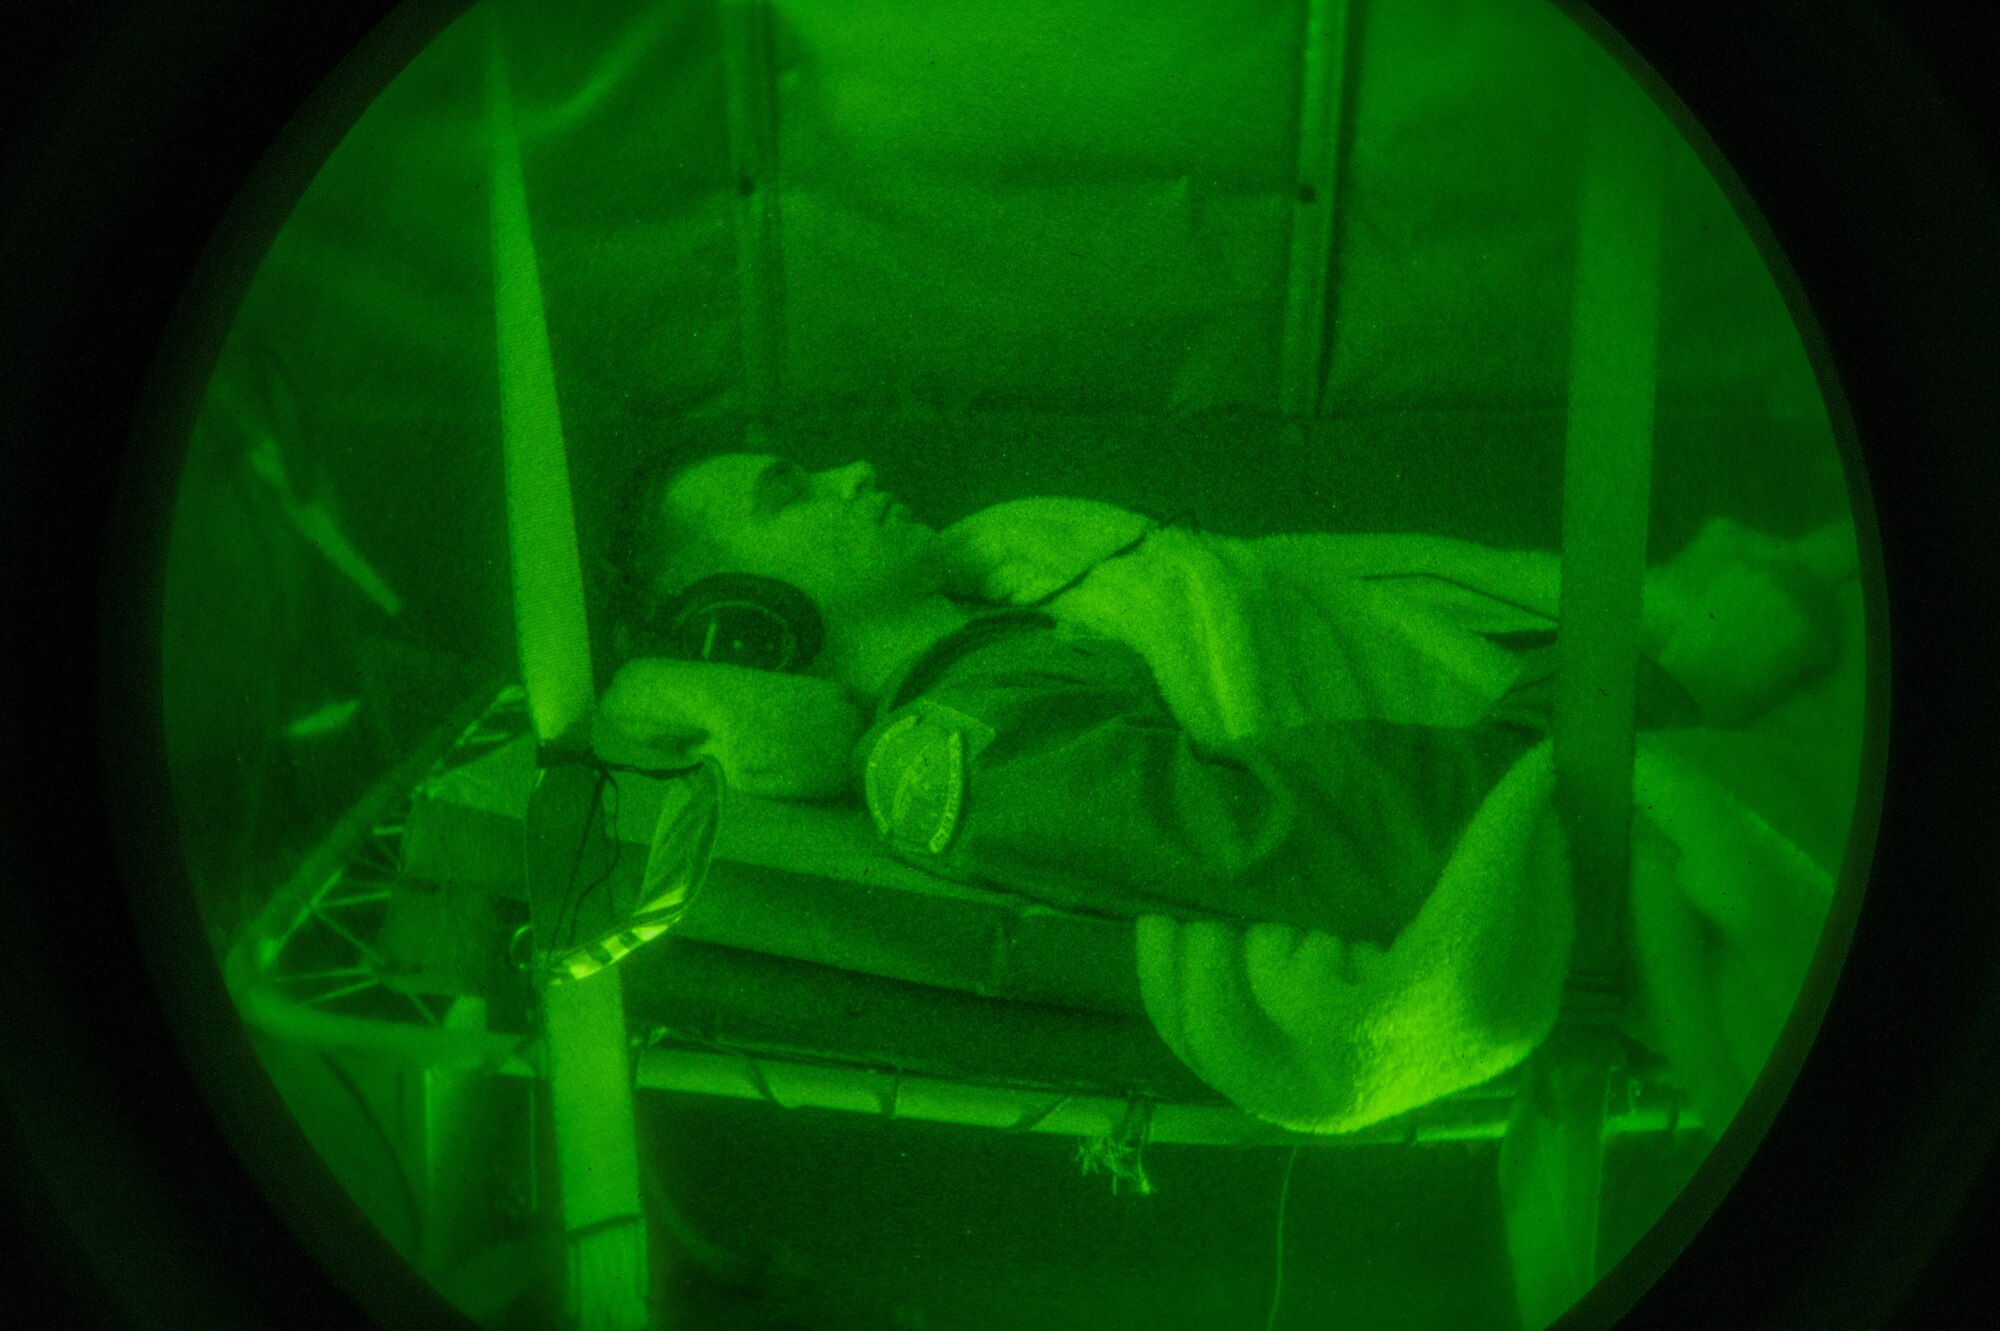 U.S. Air Force Senior Airman Chris Neuman, 92nd Air Refueling Squadron in-flight refueling specialist, sleeps during his crew rest cycle aboard a KC-135 Stratotanker during a Phase 3 Lead Wing exercise, June 6th, 2023. The 92nd Air Refueling Wing deployed personnel and KC-135 Stratotankers, in preparation to be lead tanker wing at Air Mobility Command’s capstone exercise, Mobility Guardian 2023. Concepts such as crew resting on the aircraft and wearable devices to track real time fatigue/stress on the aircrew were utilized in this phase of Mobility Guardian preparation.